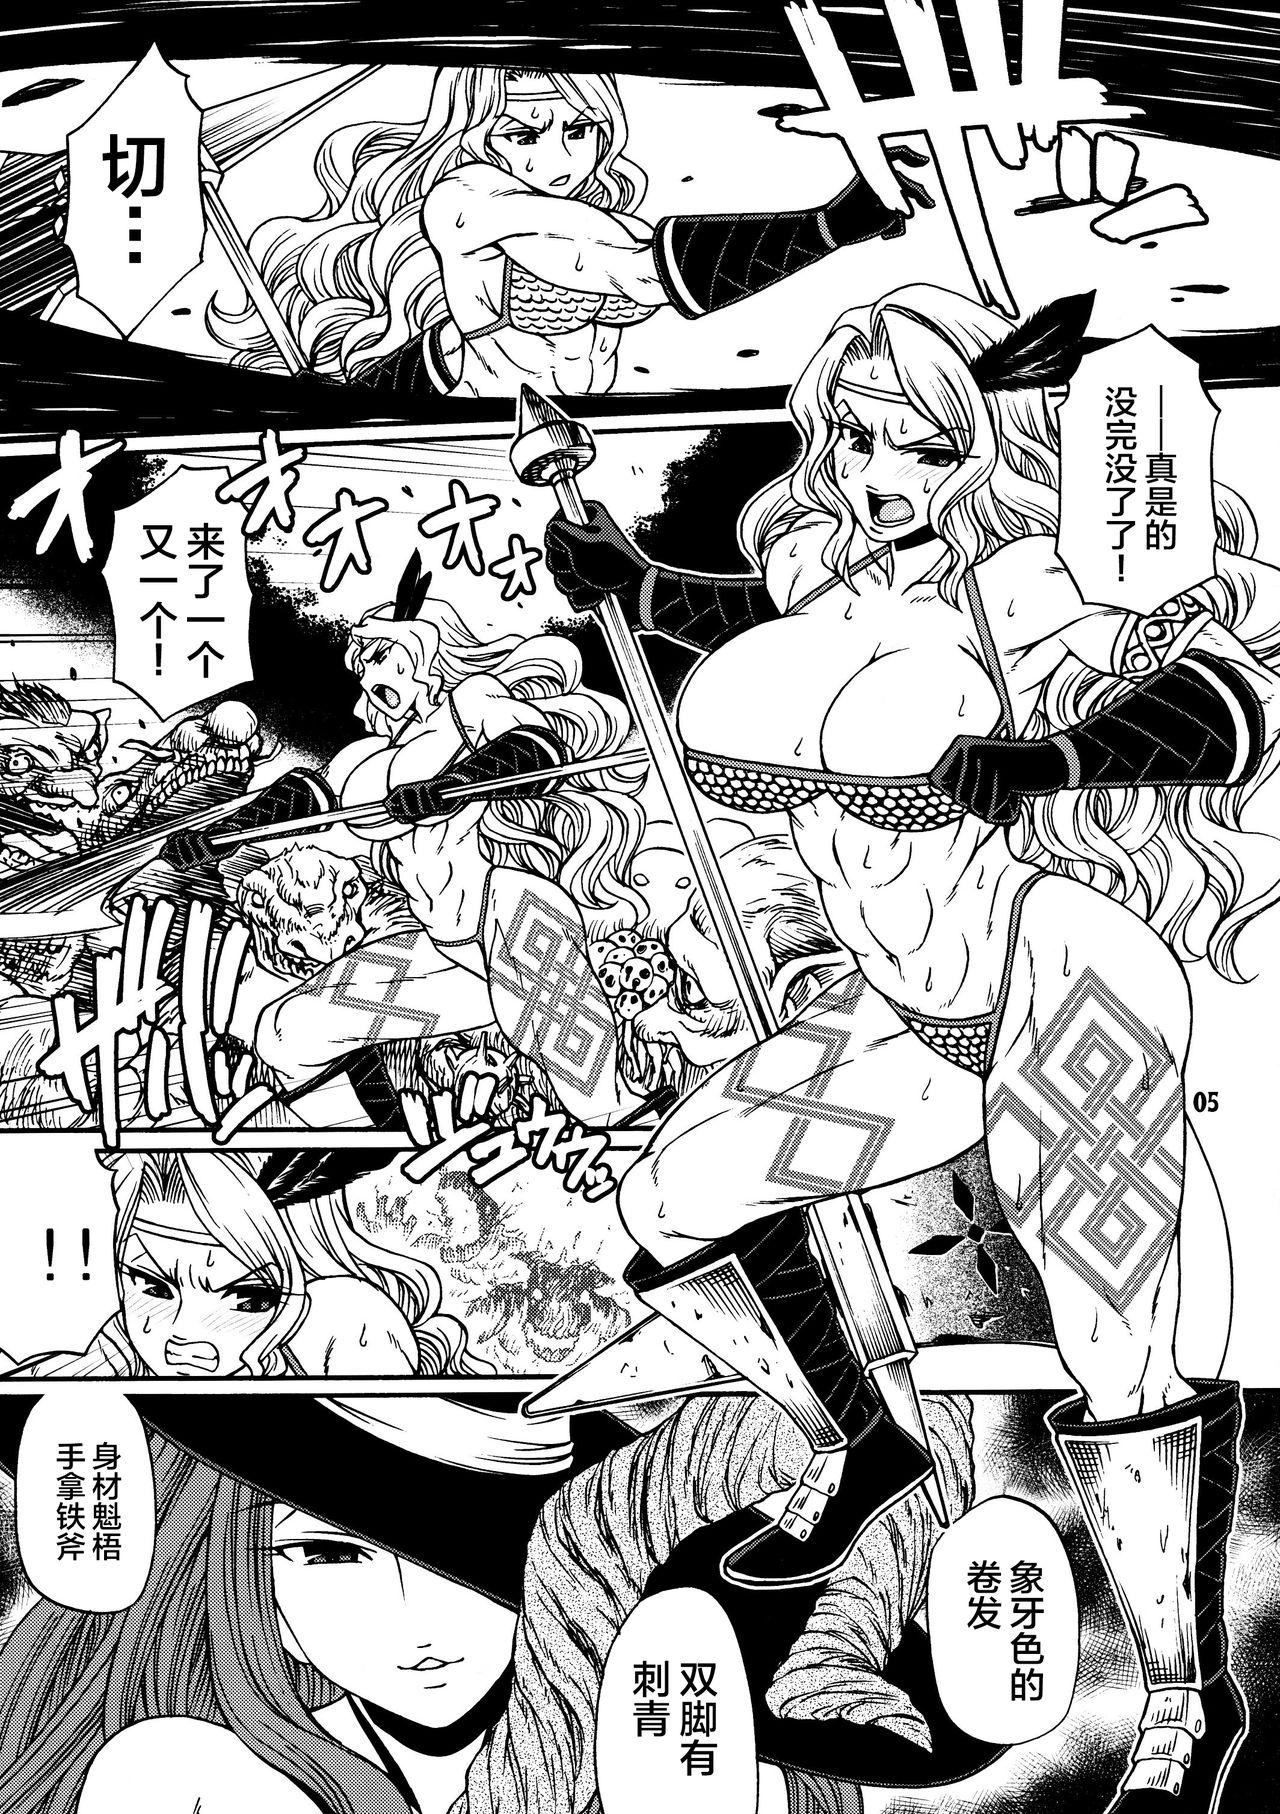 Anal Gape PARTY HARD - Dragons crown Trimmed - Page 4